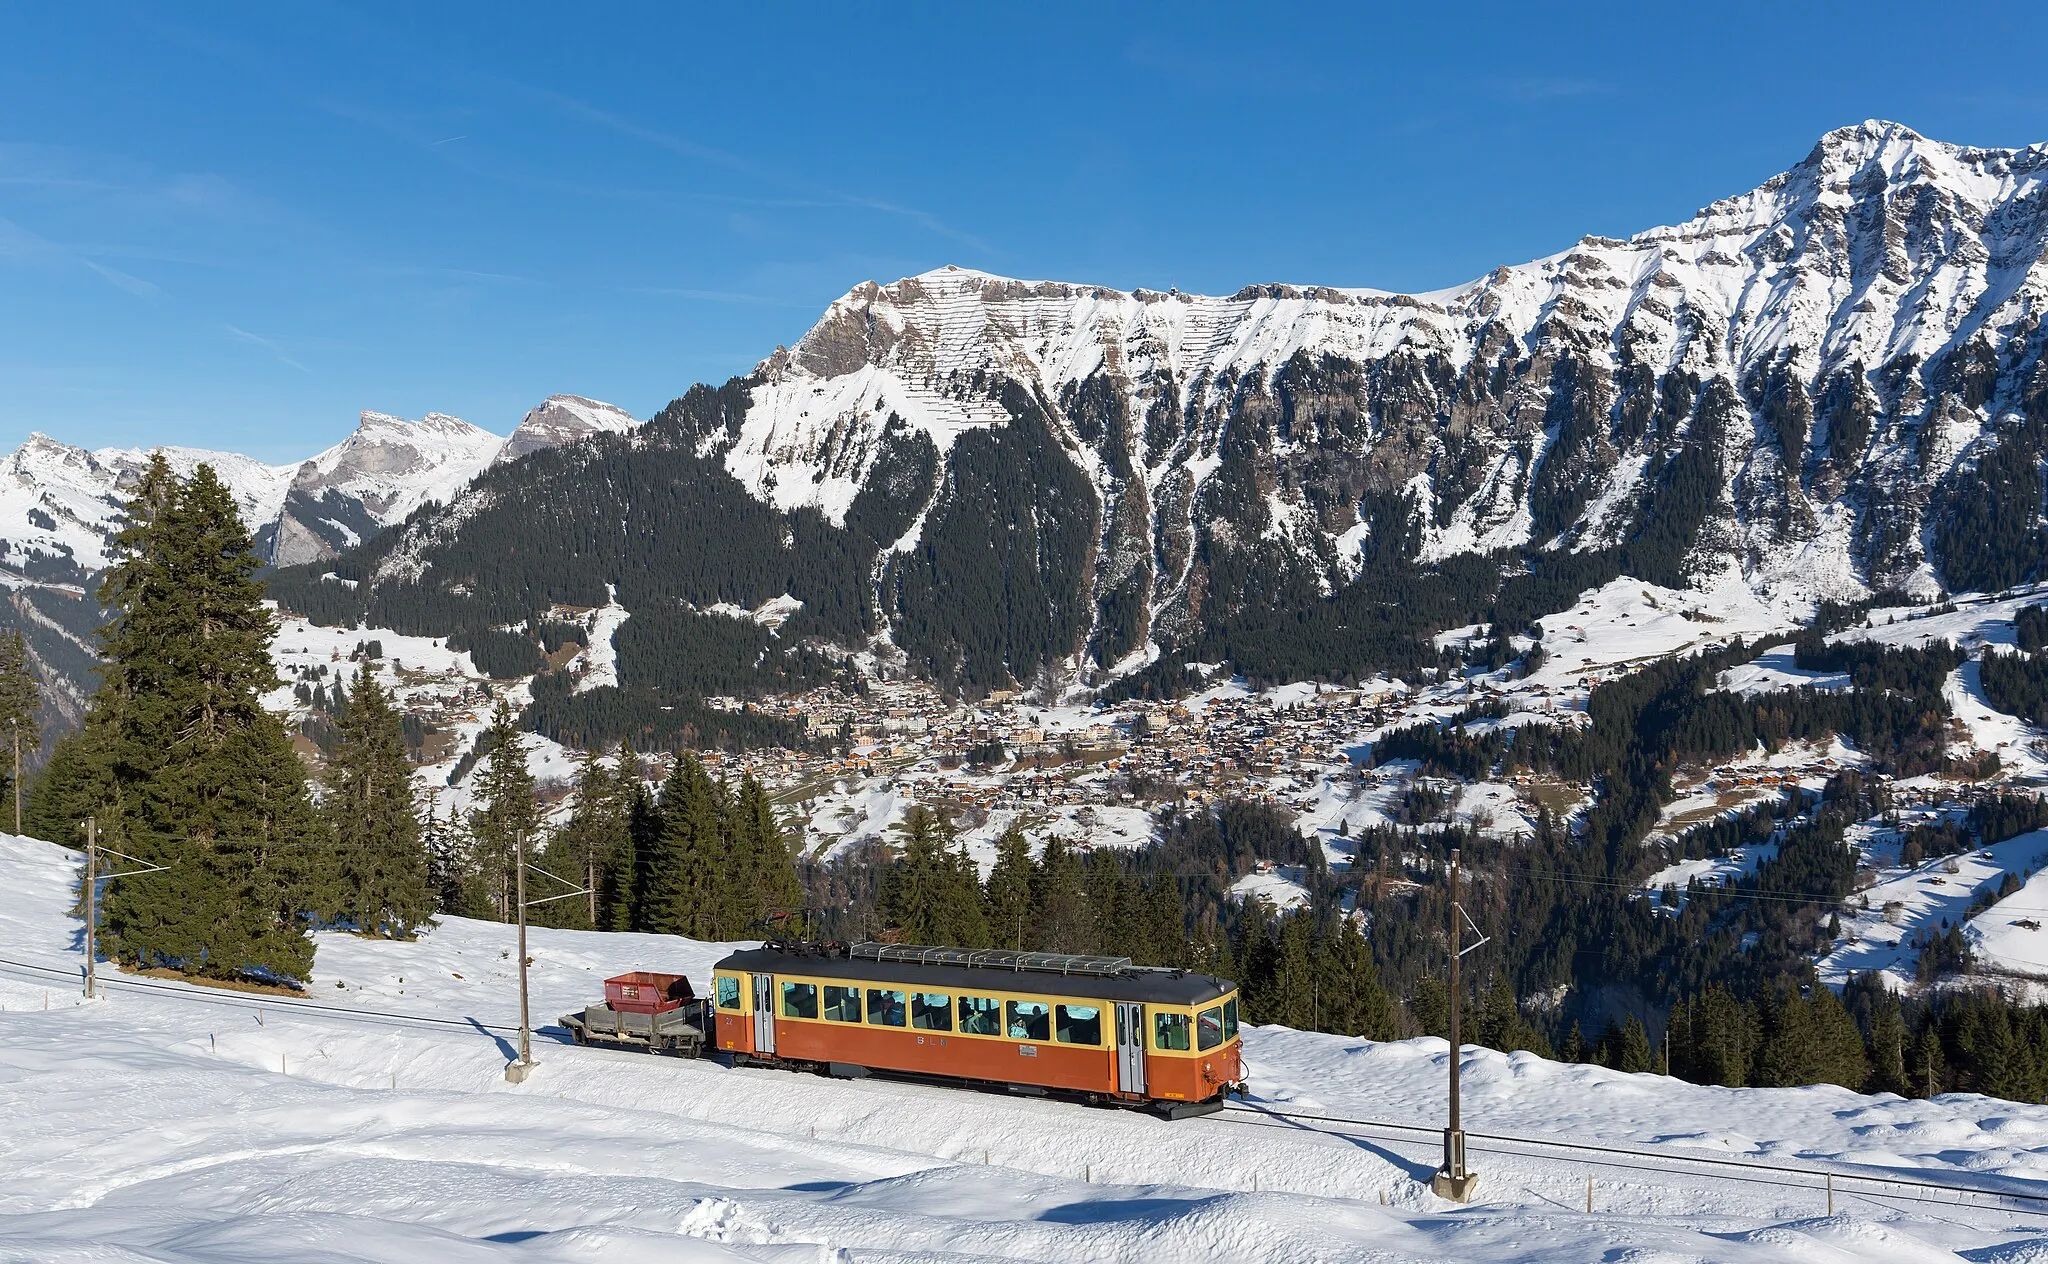 Photo showing: BDe 4/4 22 of Bergbahn Lauterbrunnen - Mürren is on its way from Grütschalp to Winteregg, Switzerland. On the other side of the valley we can see Wengen.